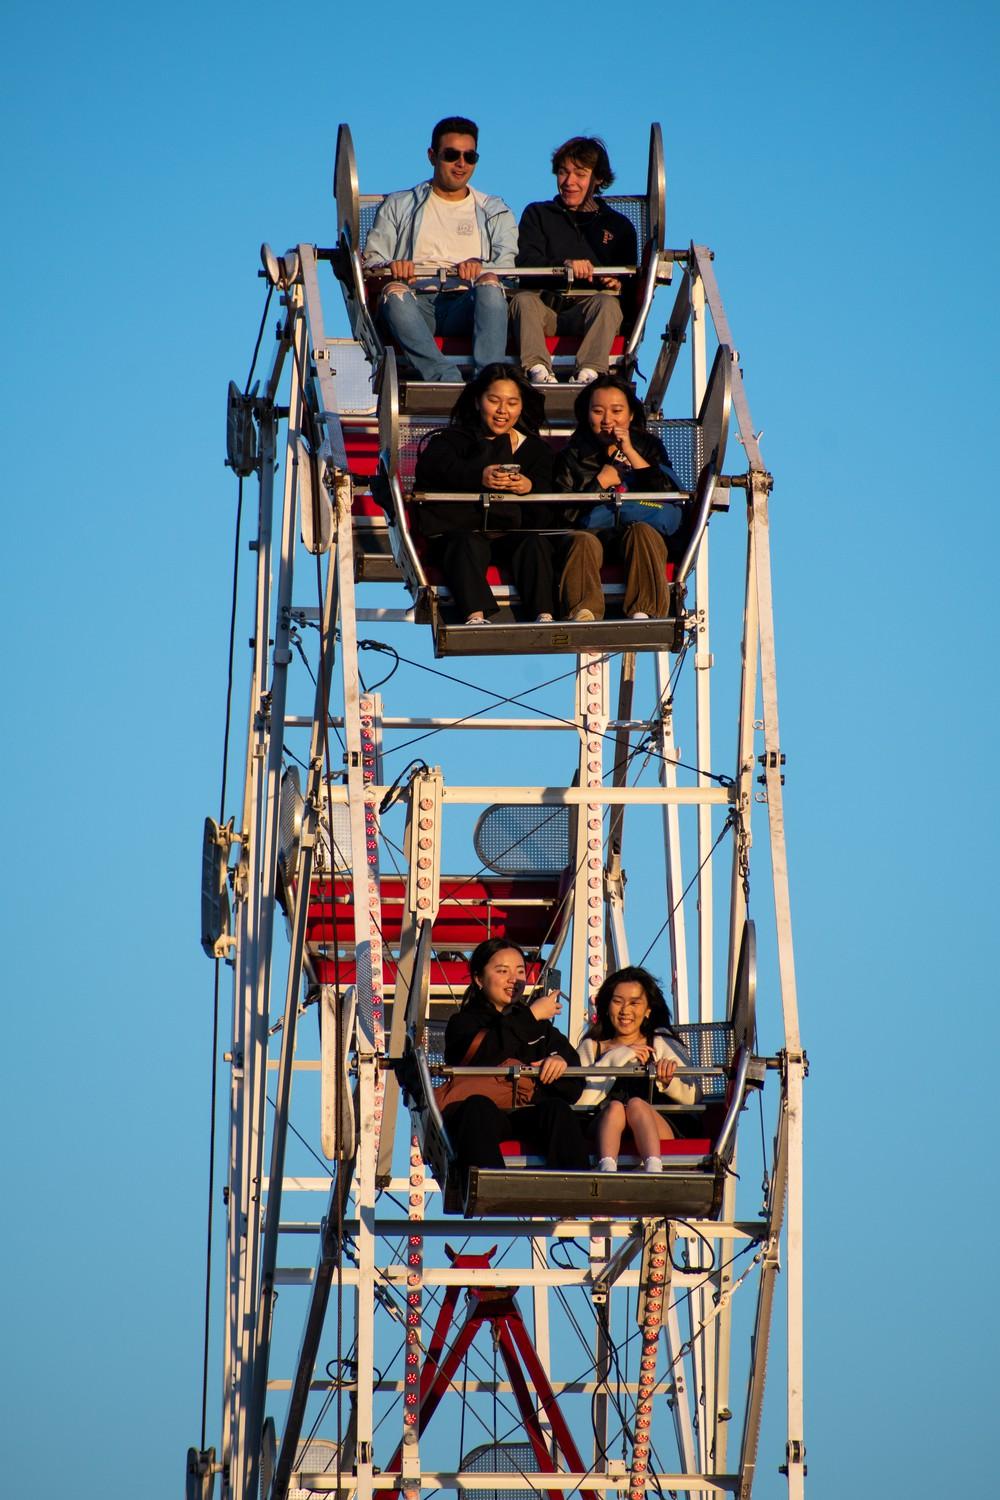 Students ride the ferris wheel on Alumni Park for PSMA on March 25. Over 450 community members attended PSMA. Photo by Brandon Rubsamen